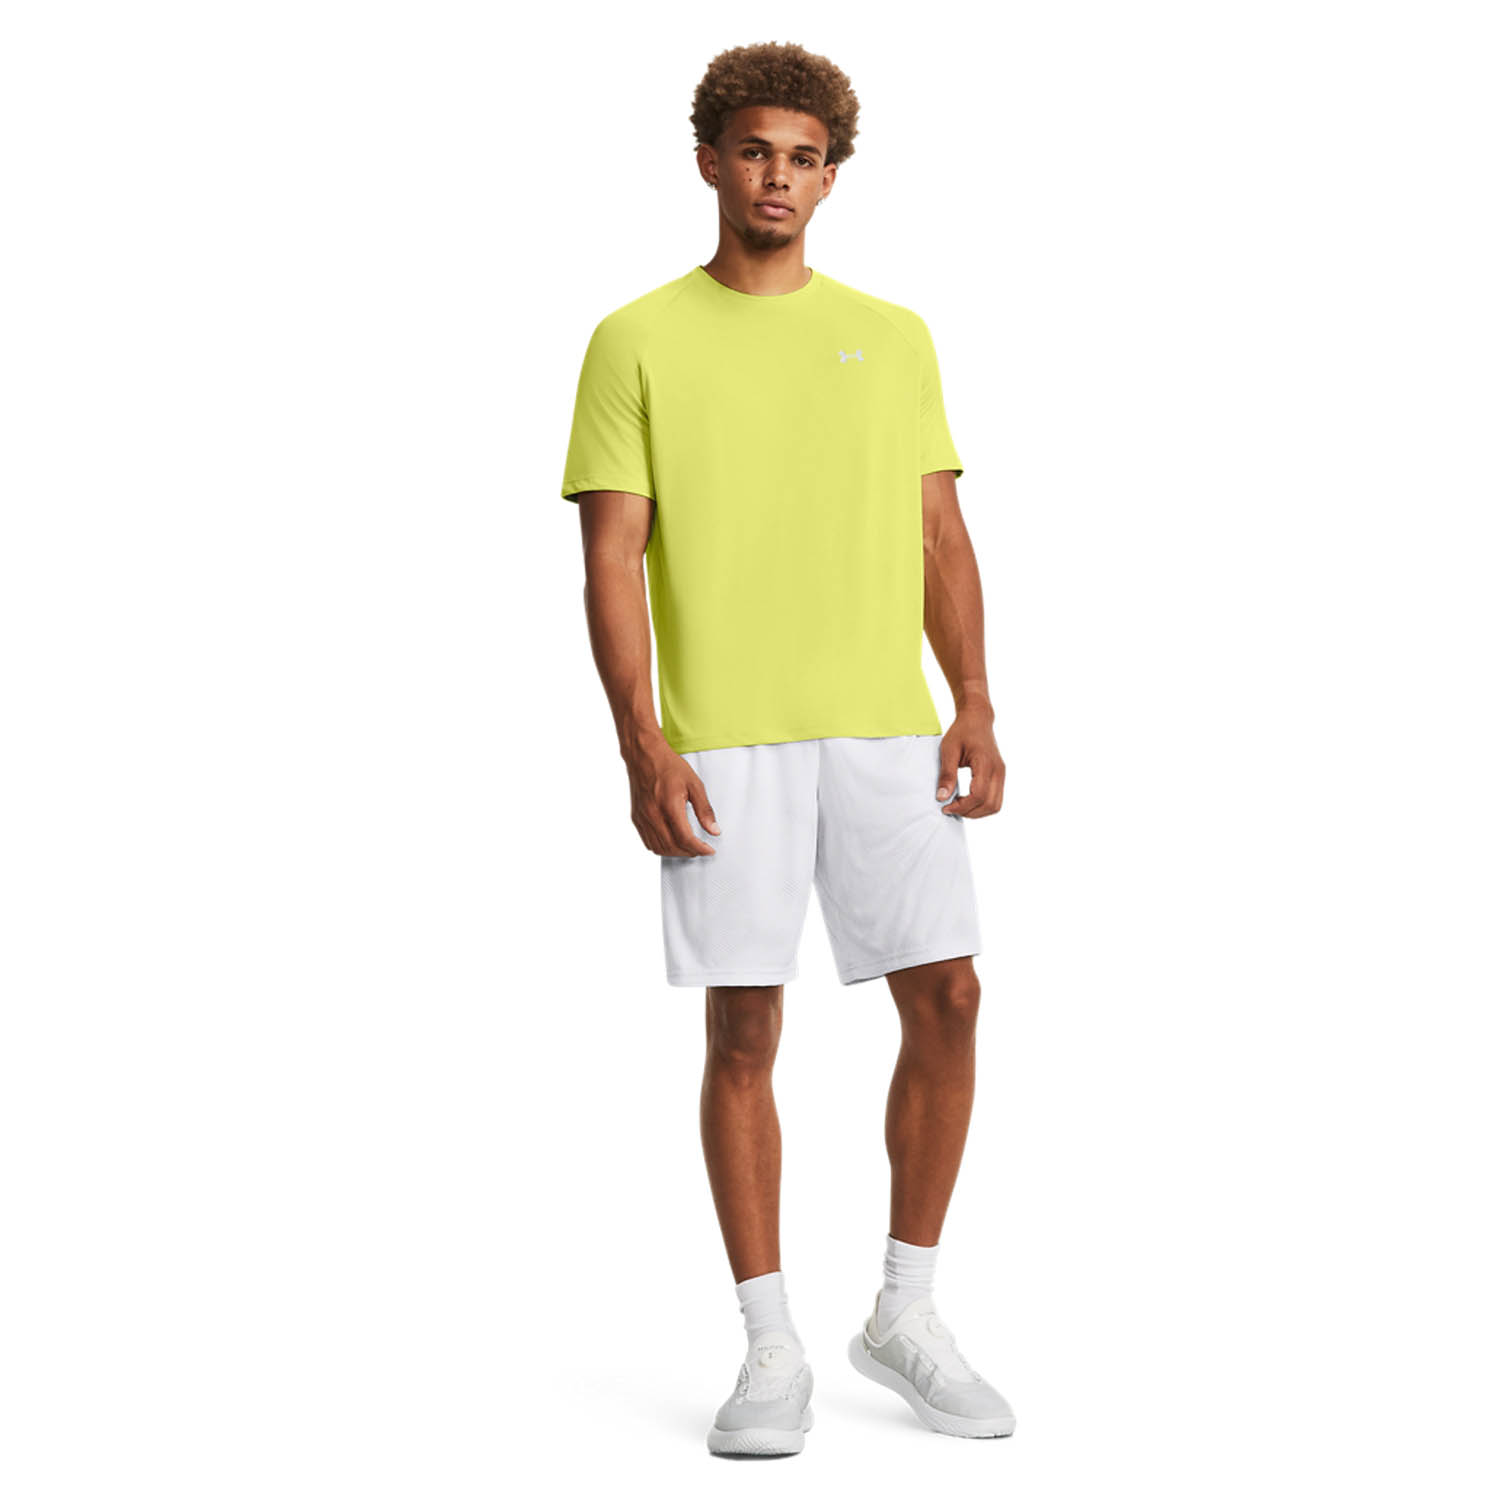 Under Armour Tech Reflective Maglietta - Lime Yellow